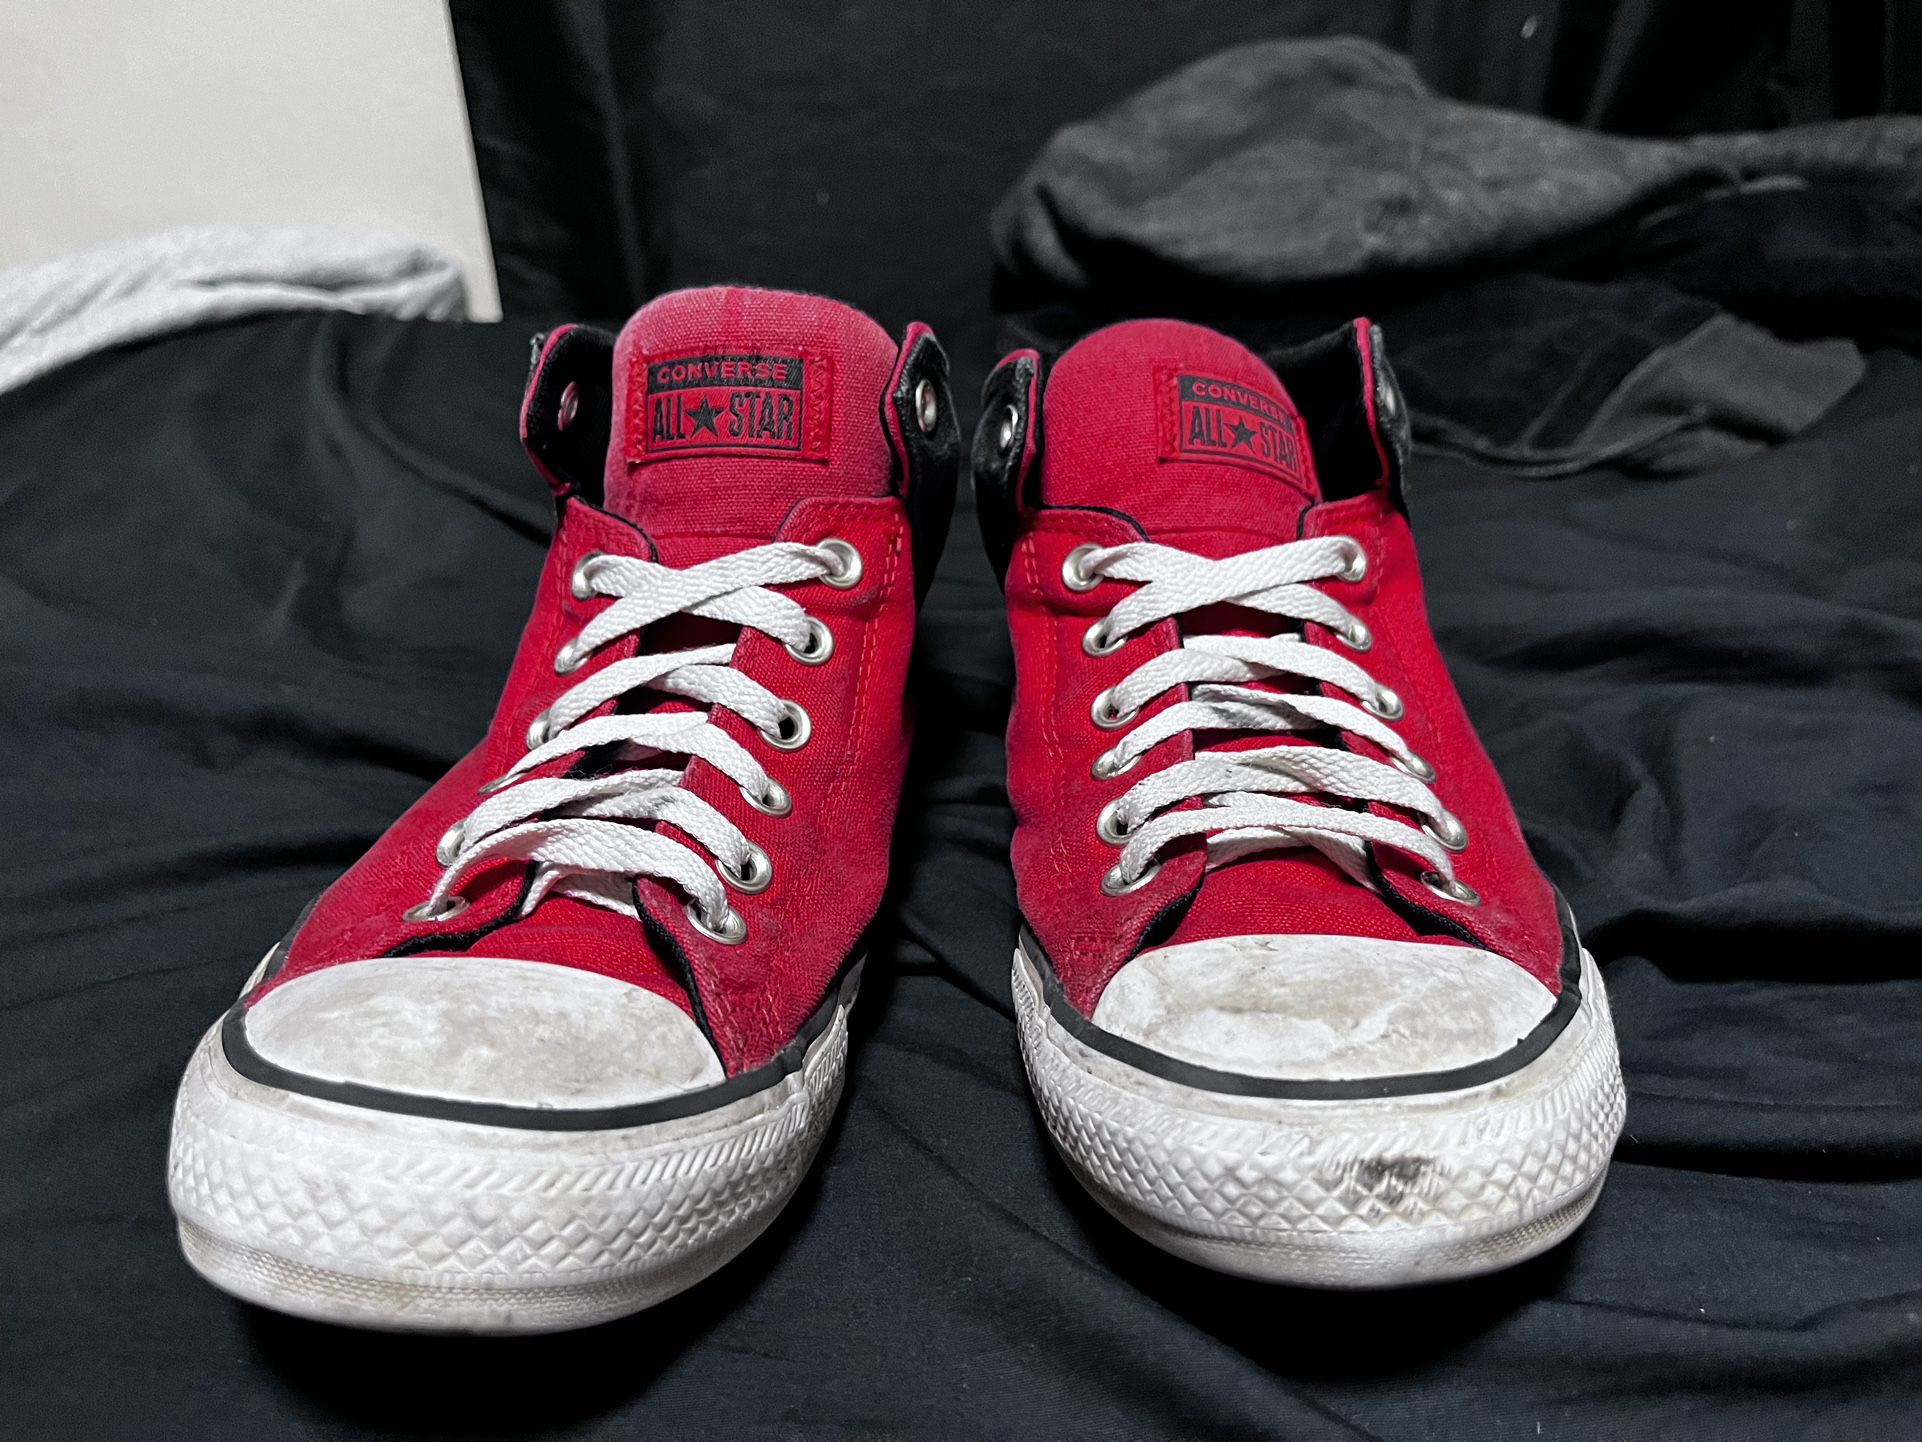 Converse All Stars Red/Black size 9.5M